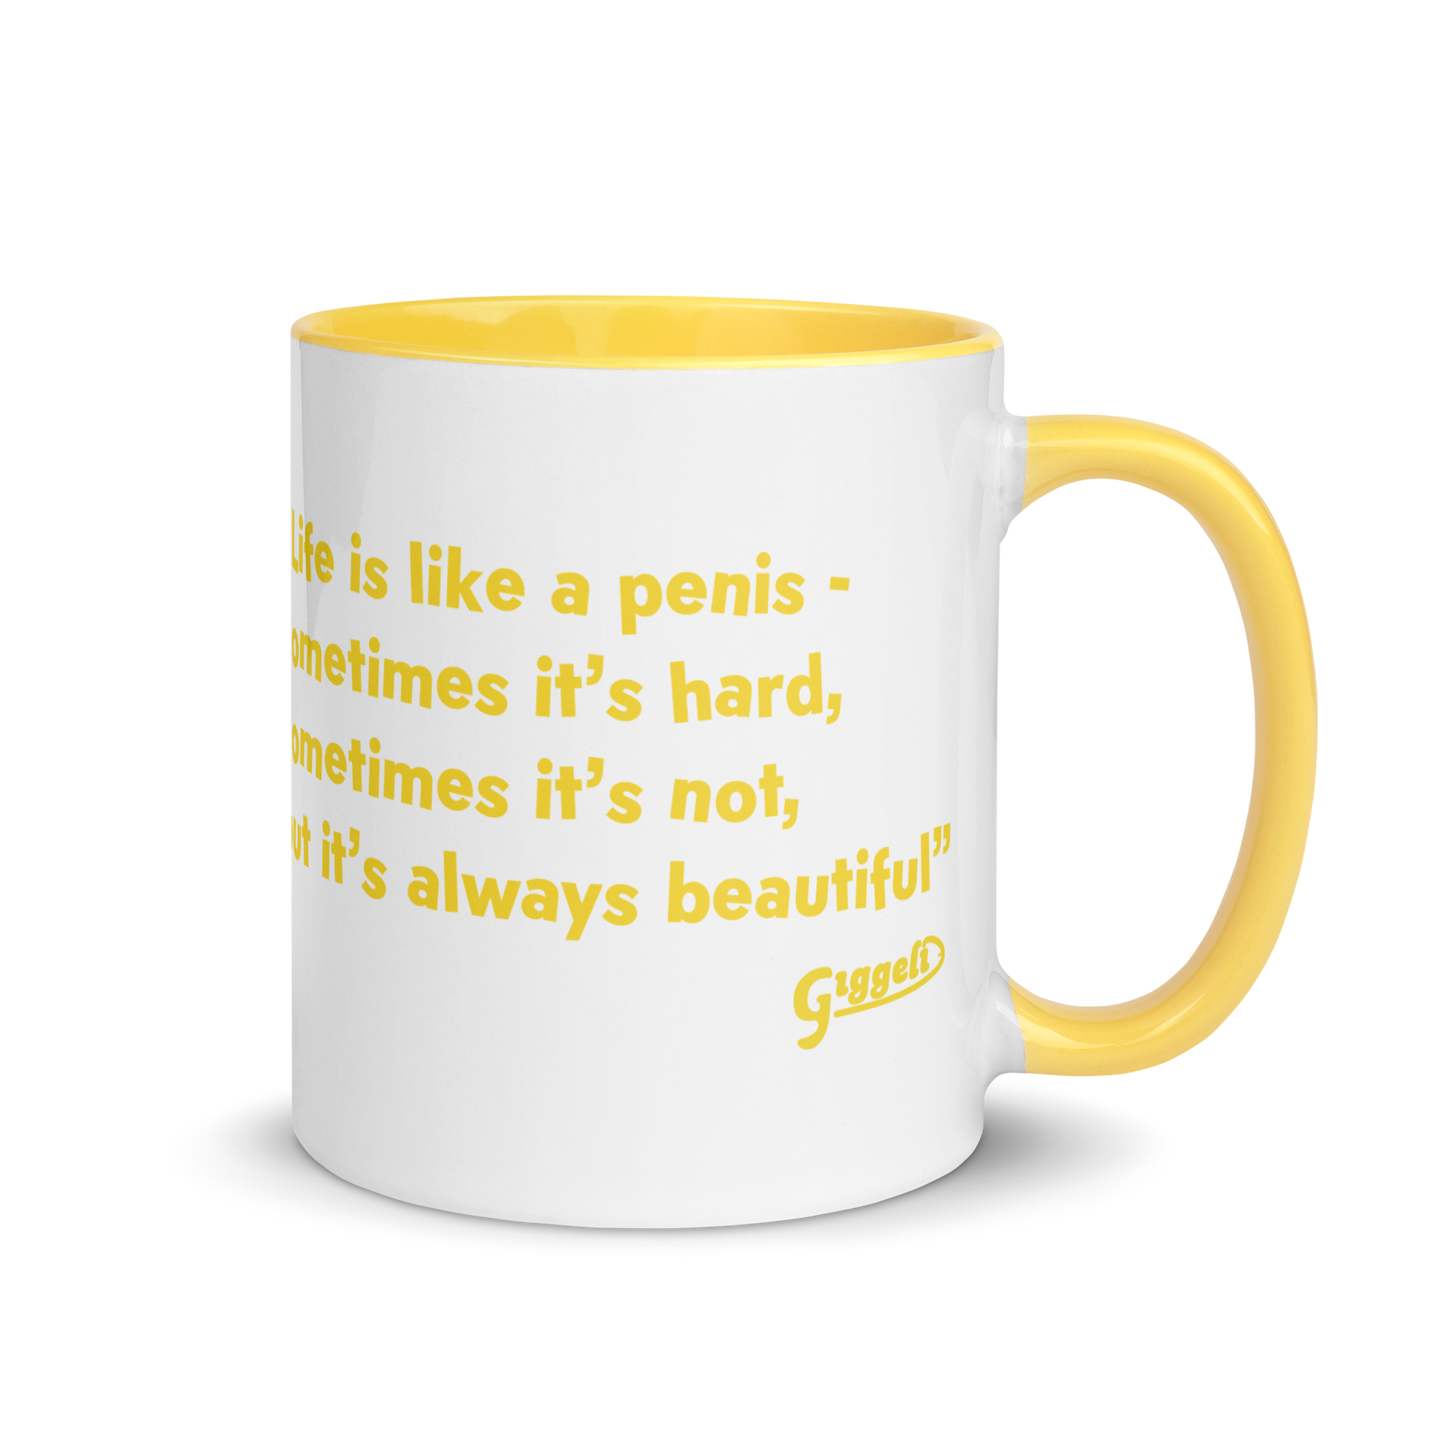 Giggeli penis mug, featuring a clever design that adds a touch of humor and body positivity to your morning coffee